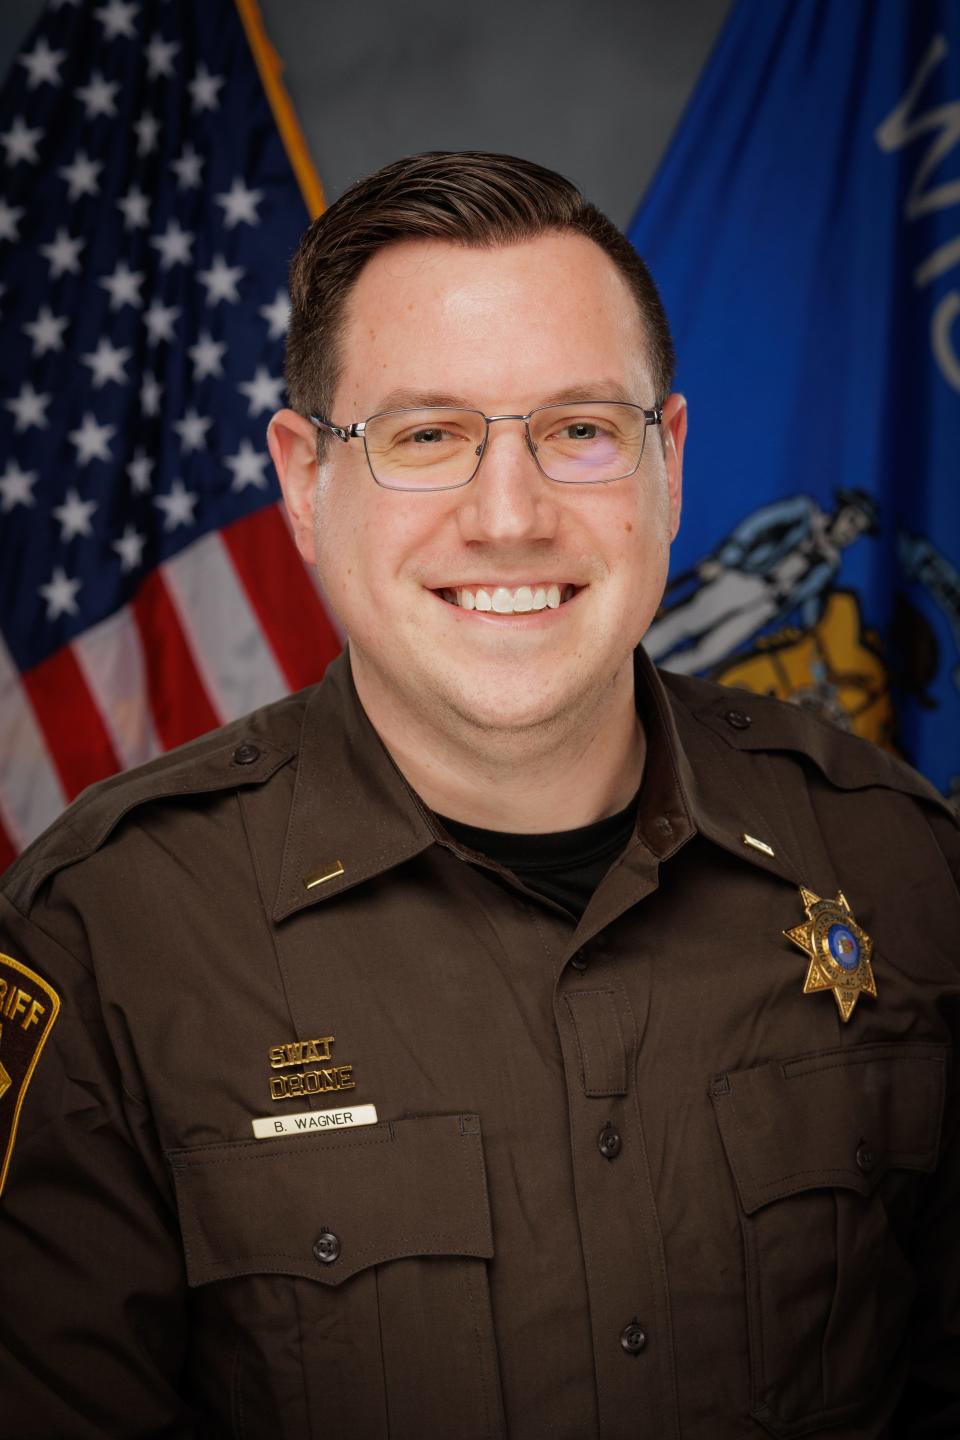 Fond du Lac County Sheriff's Office's Brennan Wagner, second in command in the communications division.